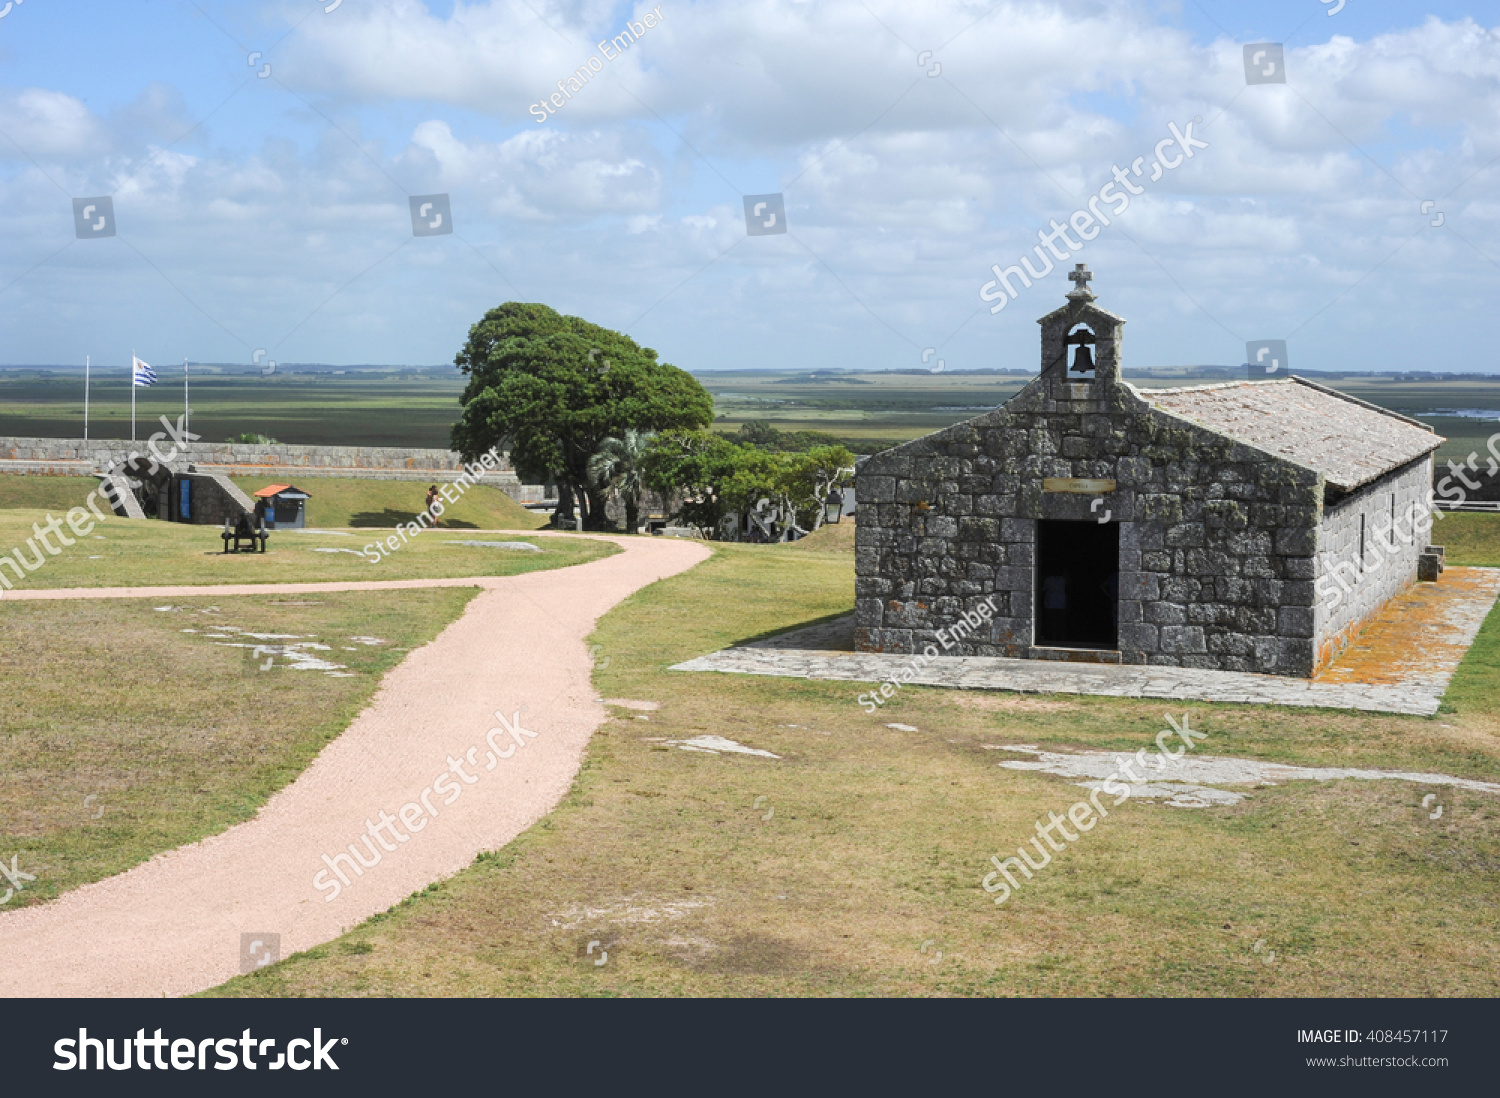 Historical Santa Teresa Fort on Uruguay. Near the Brazilian border of Chui, the fort was started by the Portuguese & finished by the Spanish, in the context of Uruguay wars spreading along 3 centuries #408457117